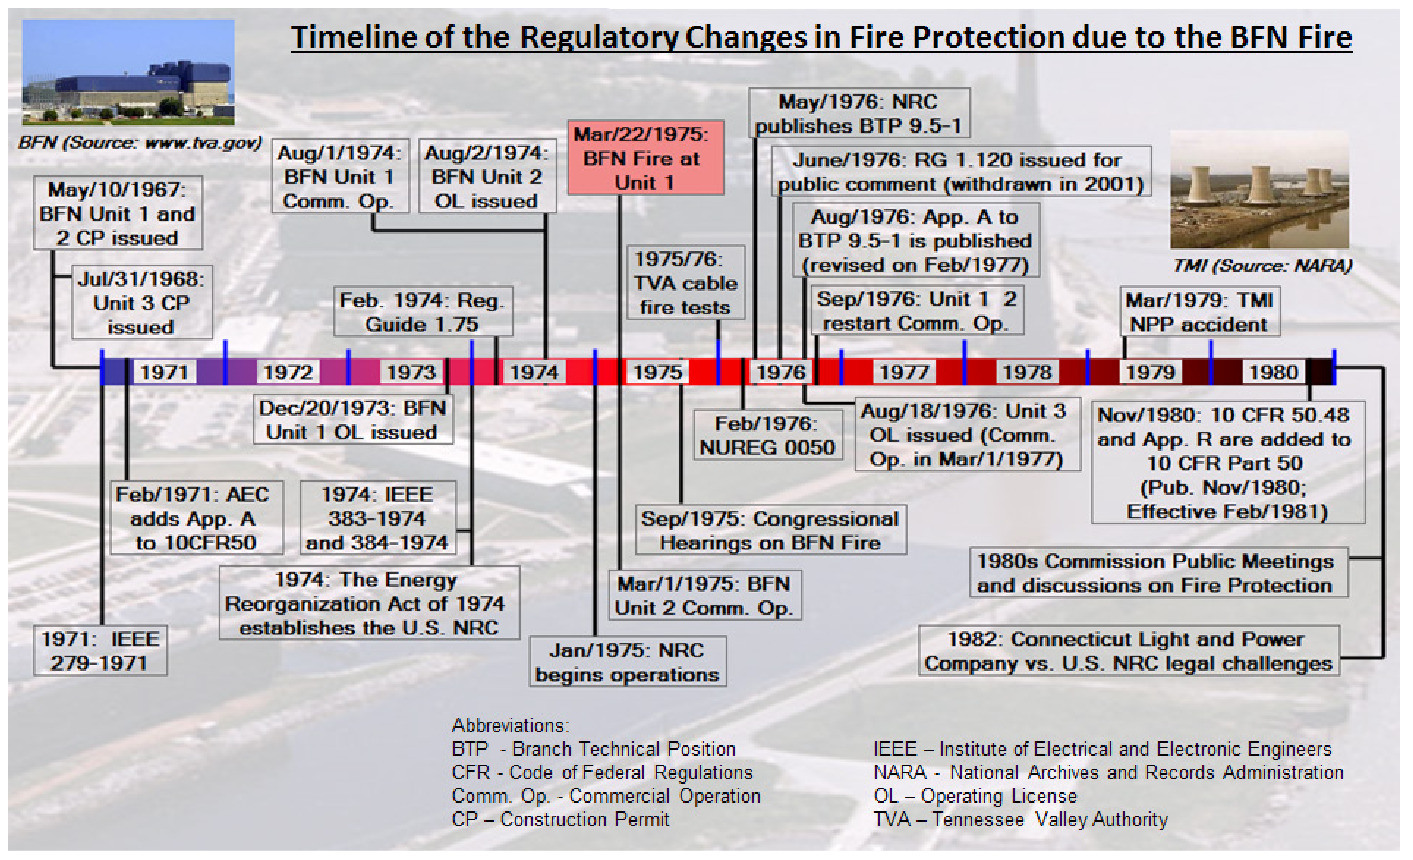 Timeline of fire regulations related to nuclear reactors due to the Browns Ferry fire.